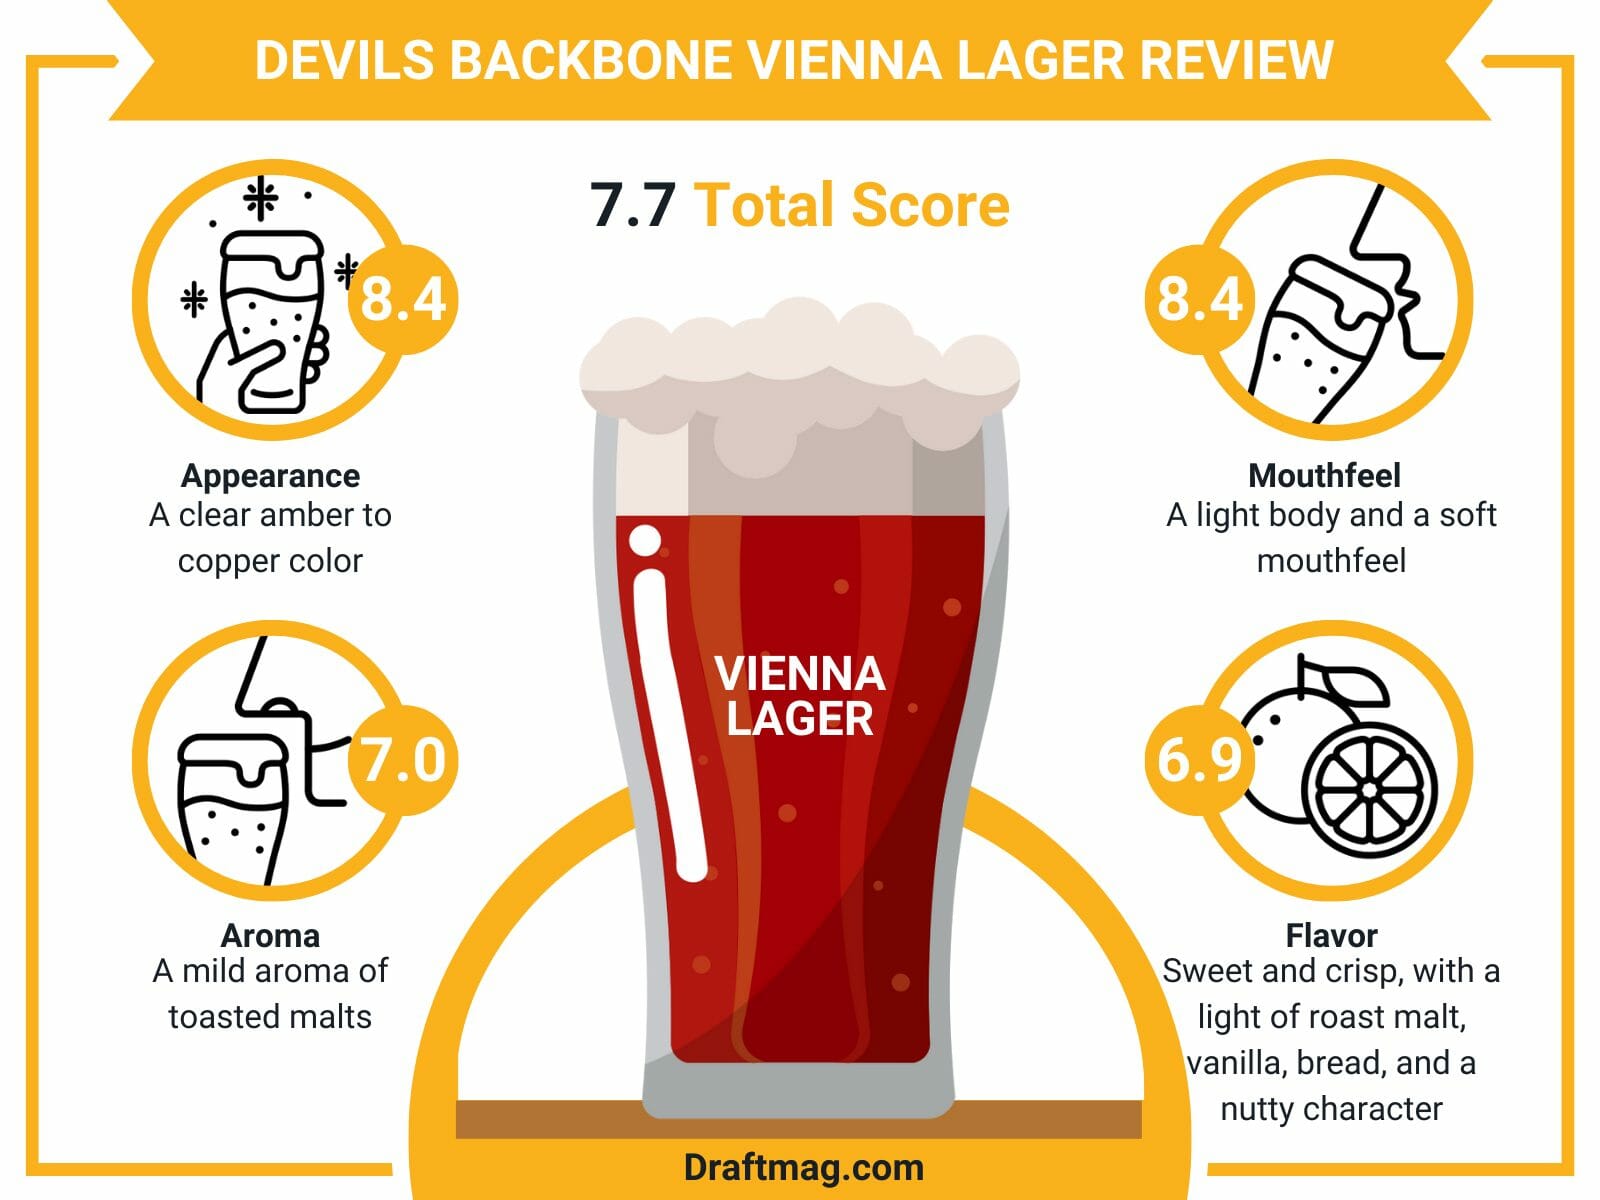 Devils backbone vienna lager review infographic